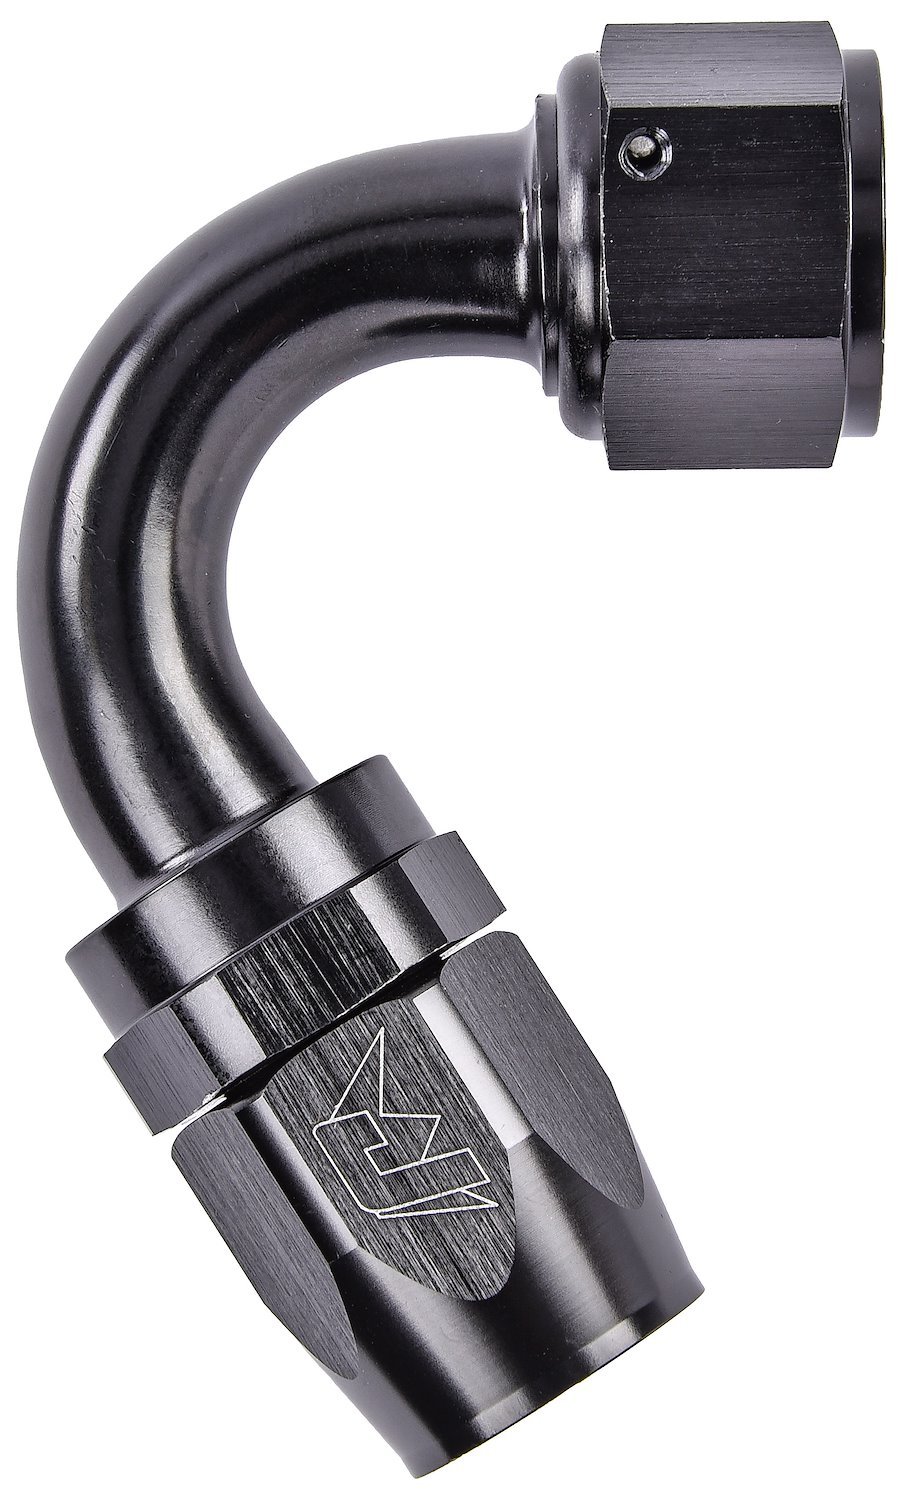 AN 120-Degree Max Flow Swivel Hose End [-12